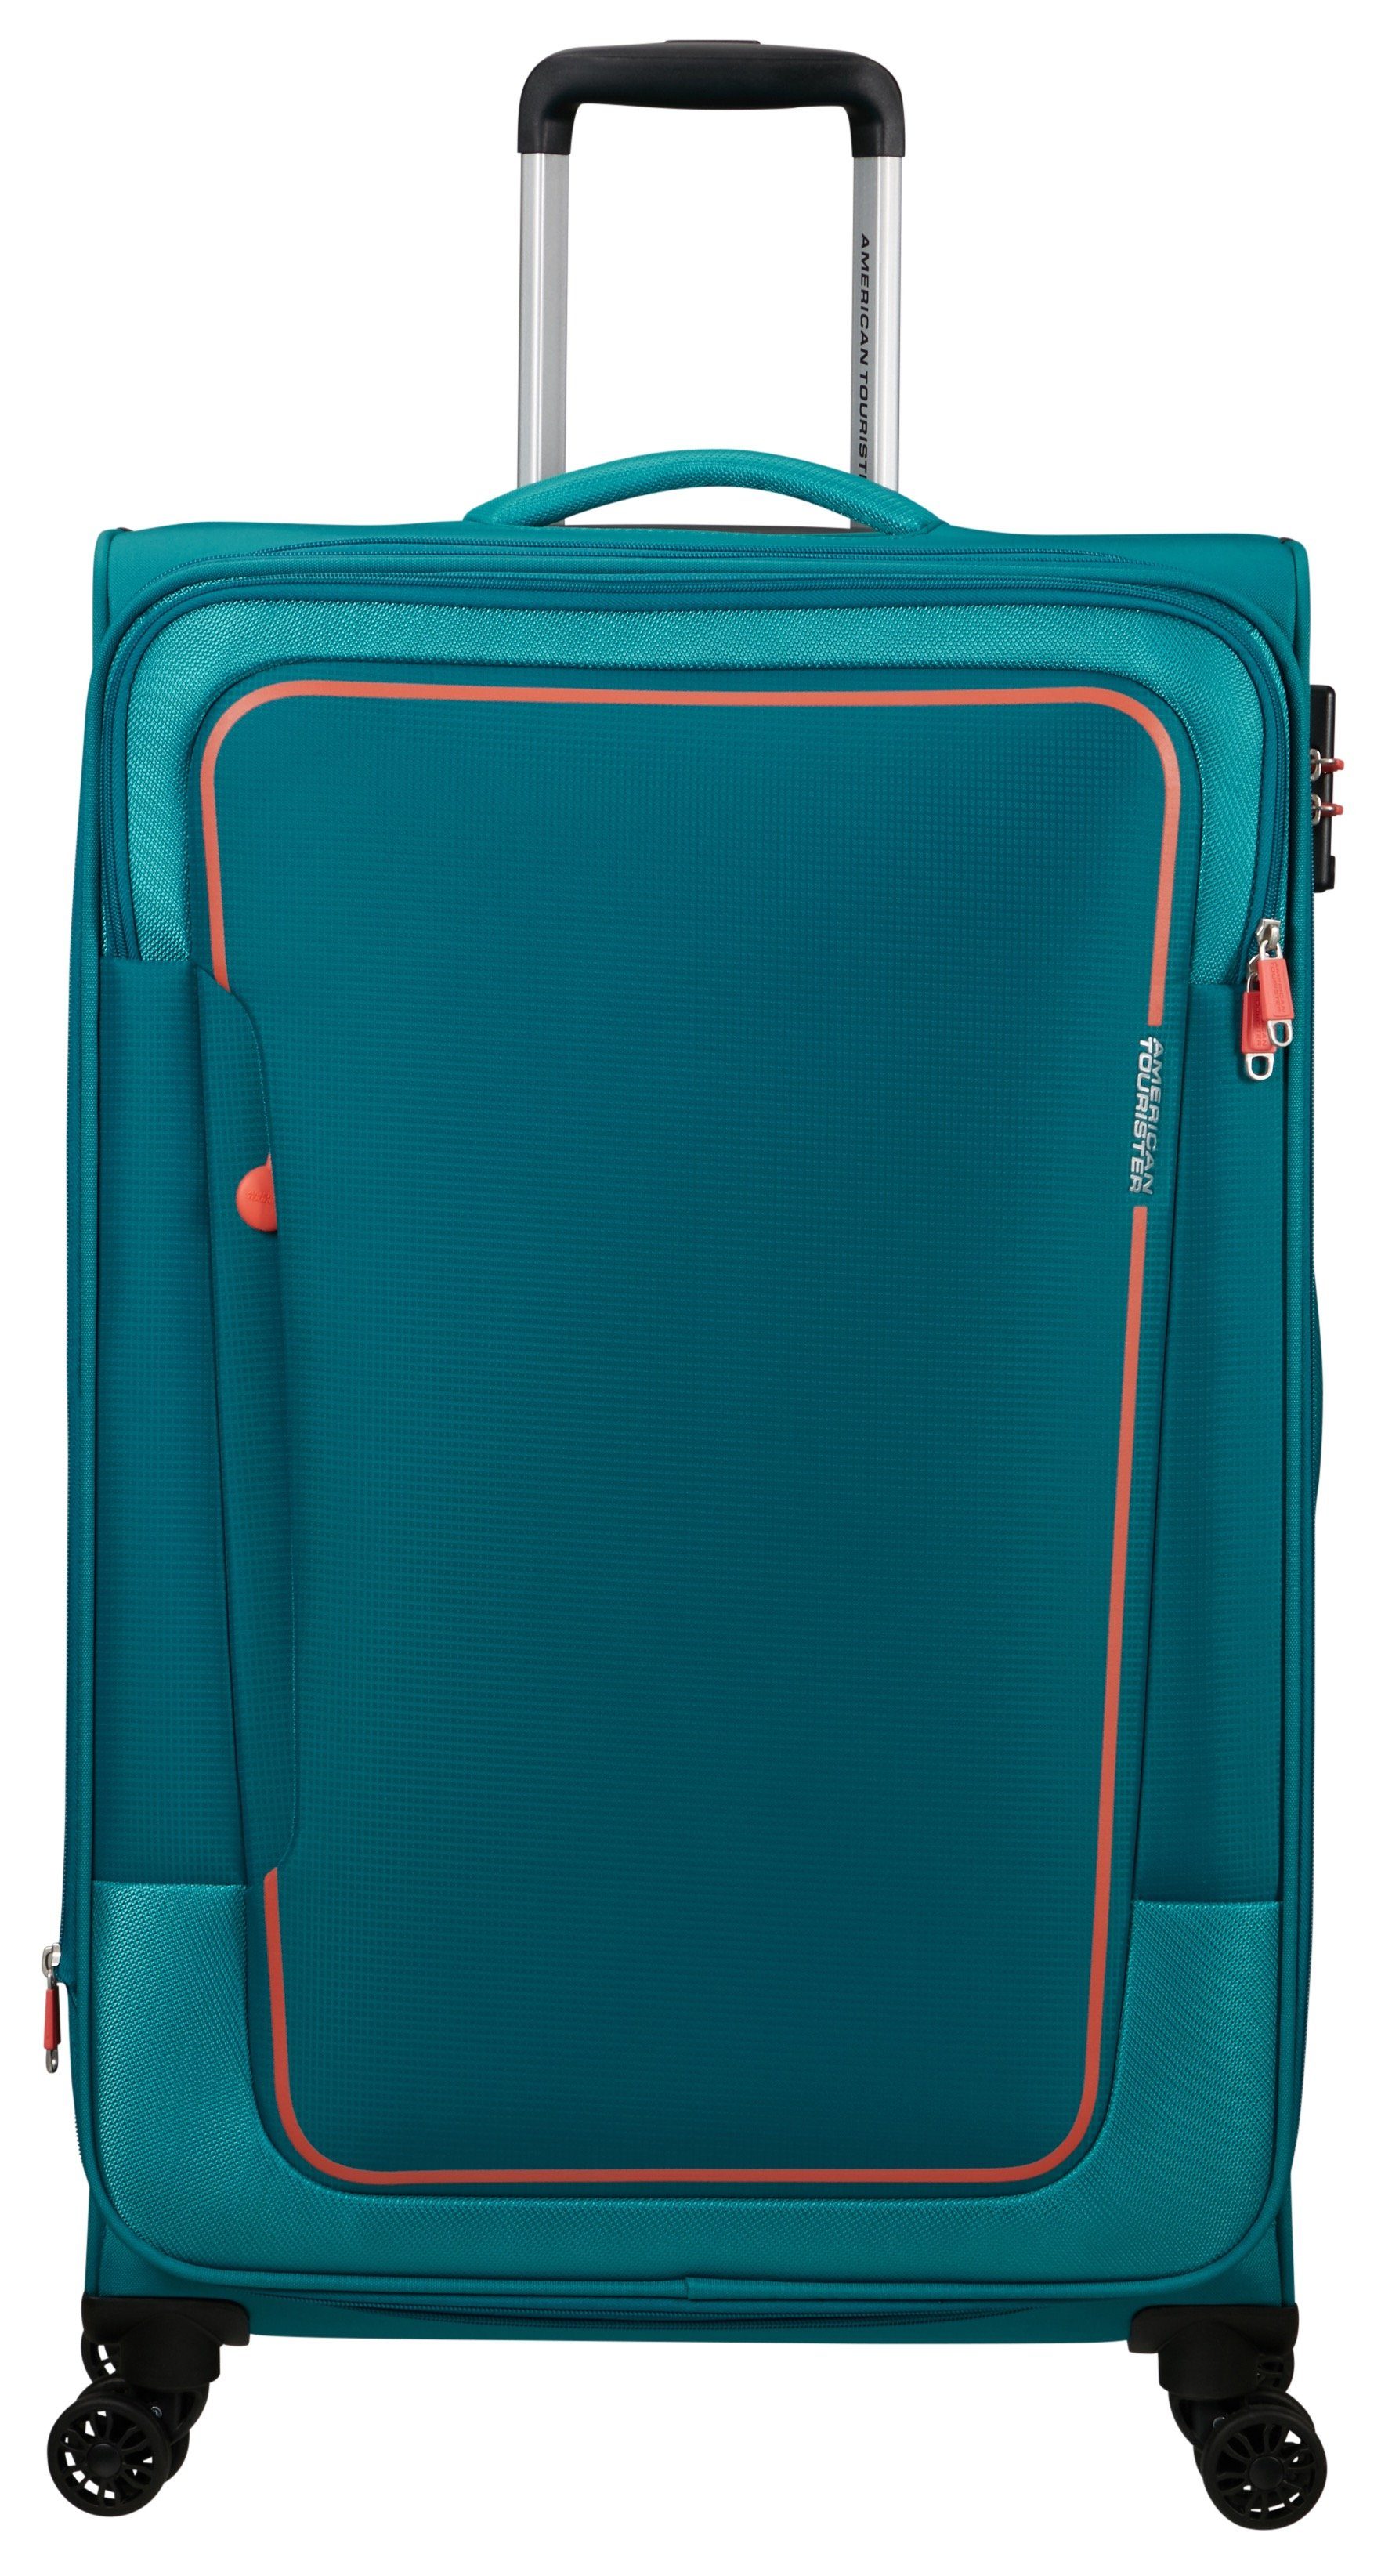 American Tourister® Koffer PULSONIC Spinner 80, 4 Rollen stone teal | Koffer